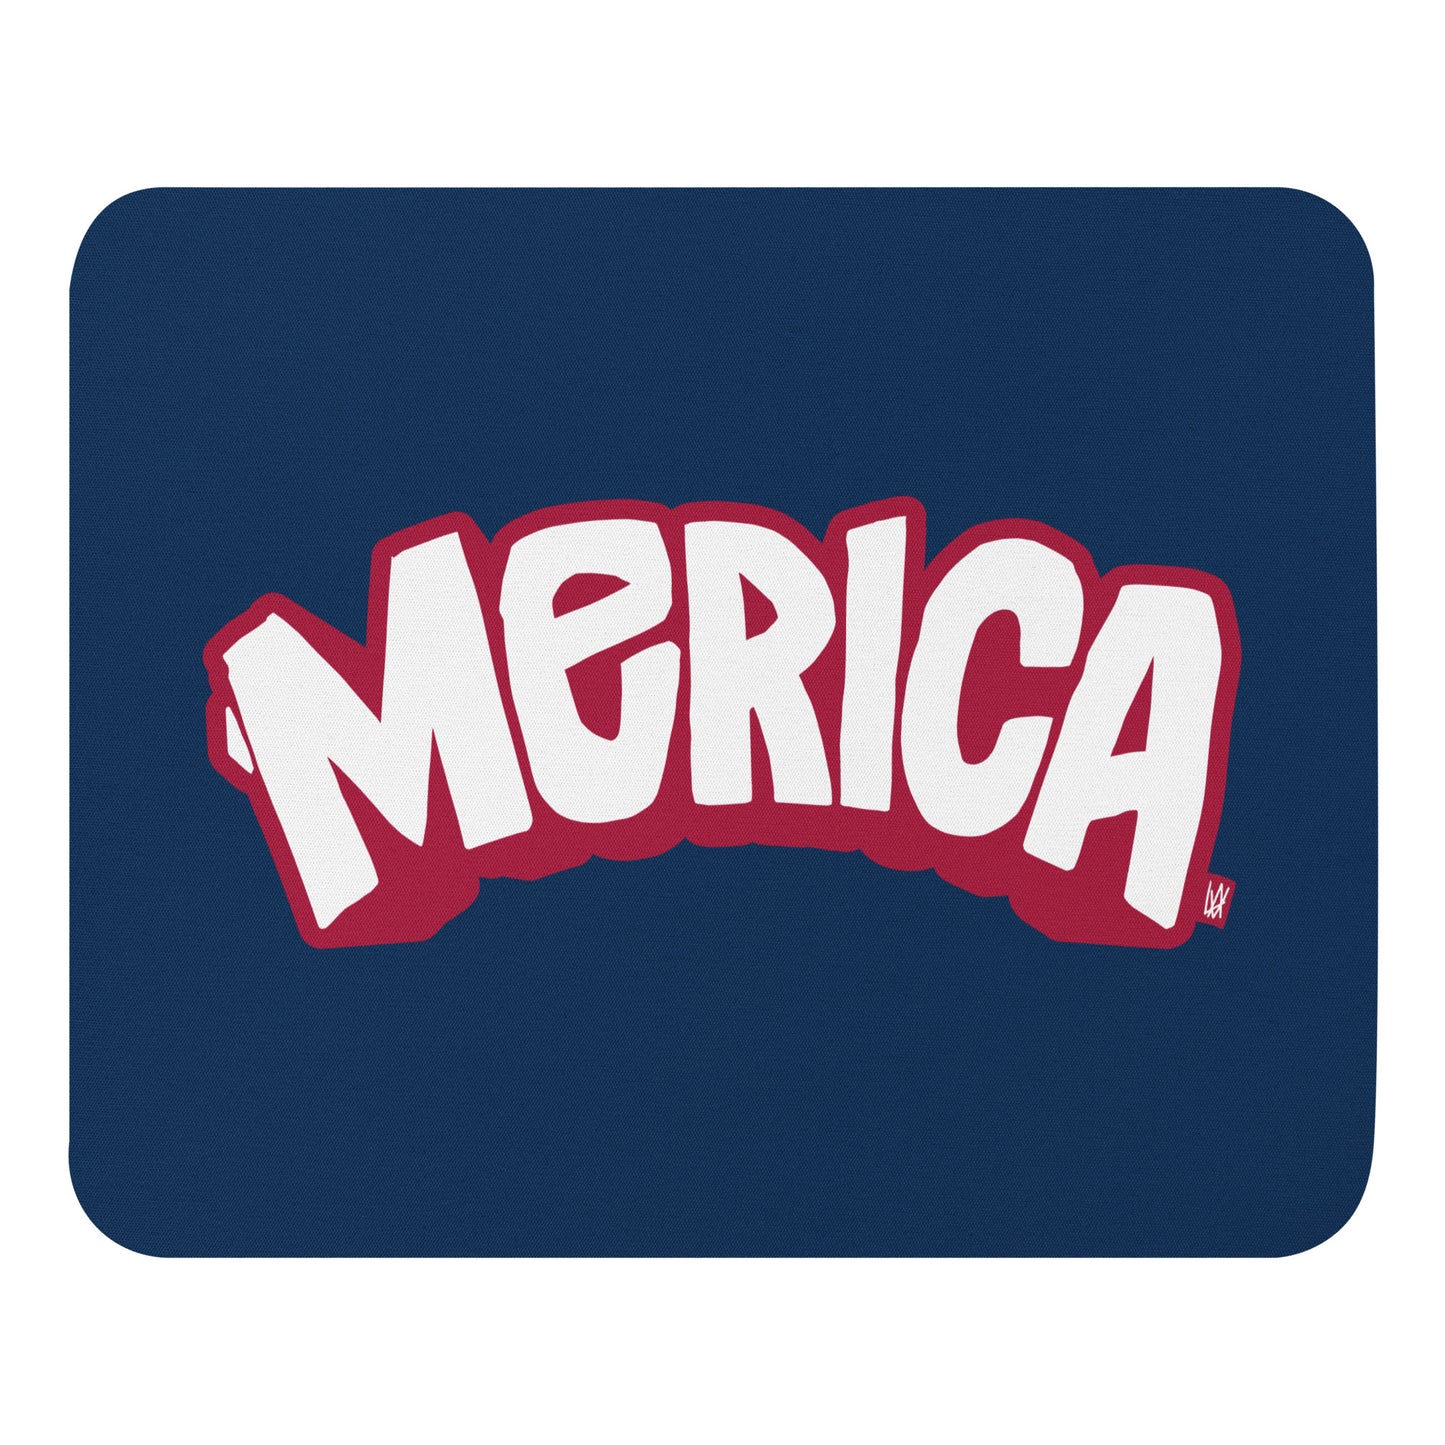 MERICA MOUSE PAD